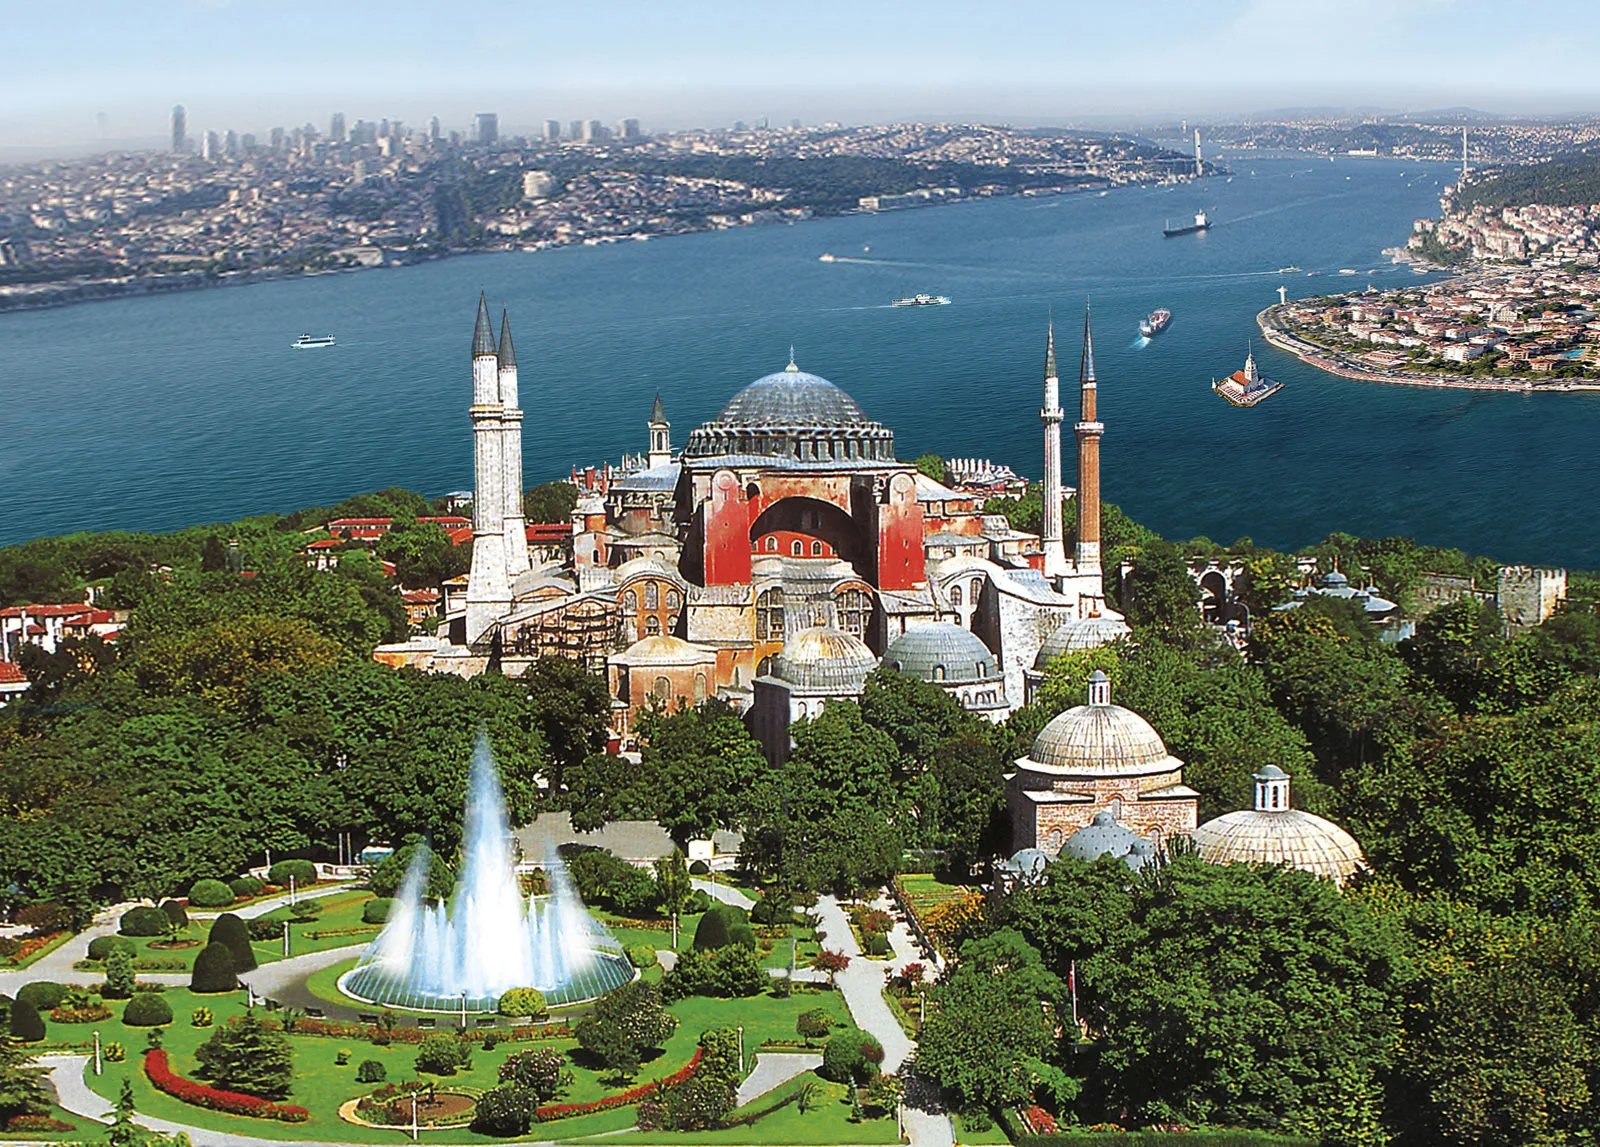 Which neighborhood in Istanbul is famous for its lively fish market and seafood restaurants?